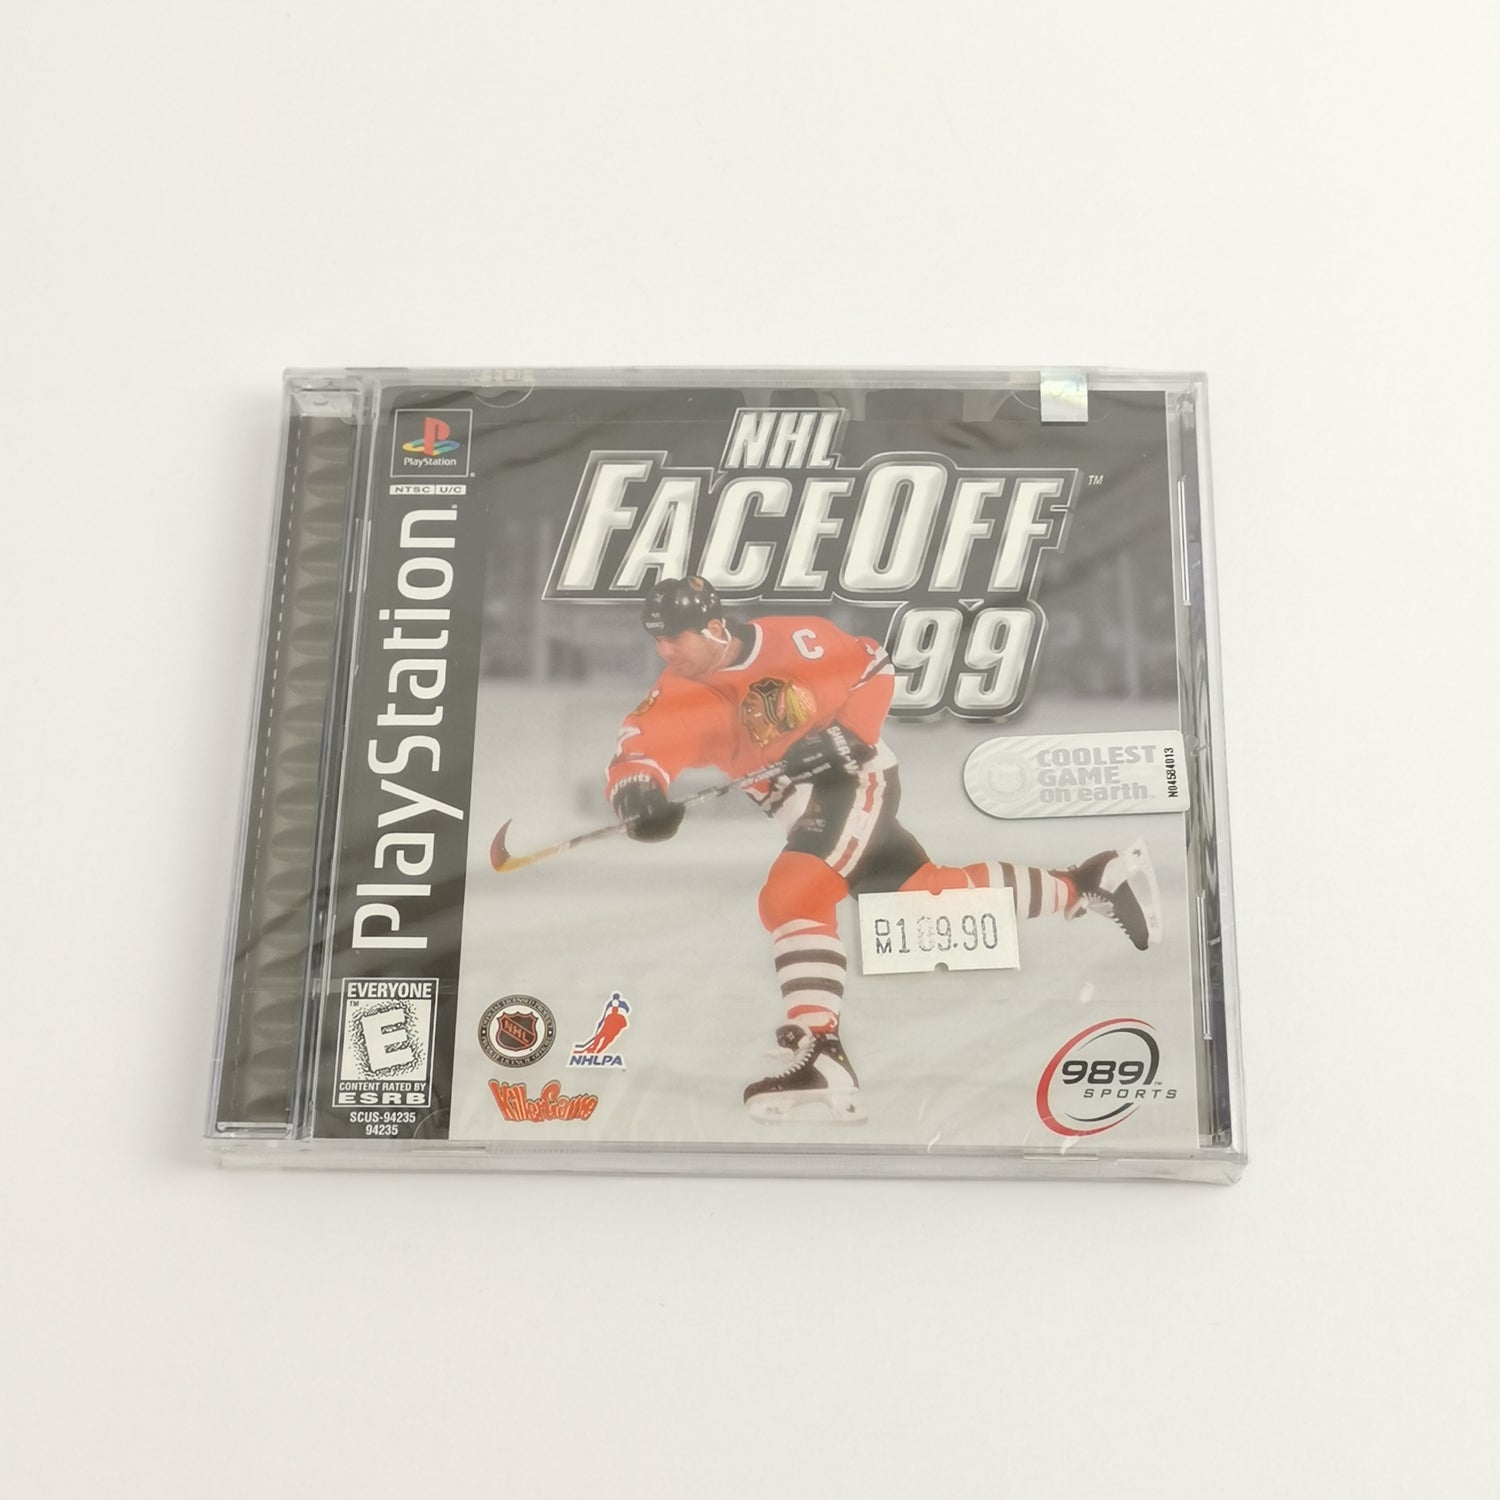 Sony Playstation 1 Game: NHL FaceOff 99 Icehockey | PS1 PSX - NEW NEW SEALED